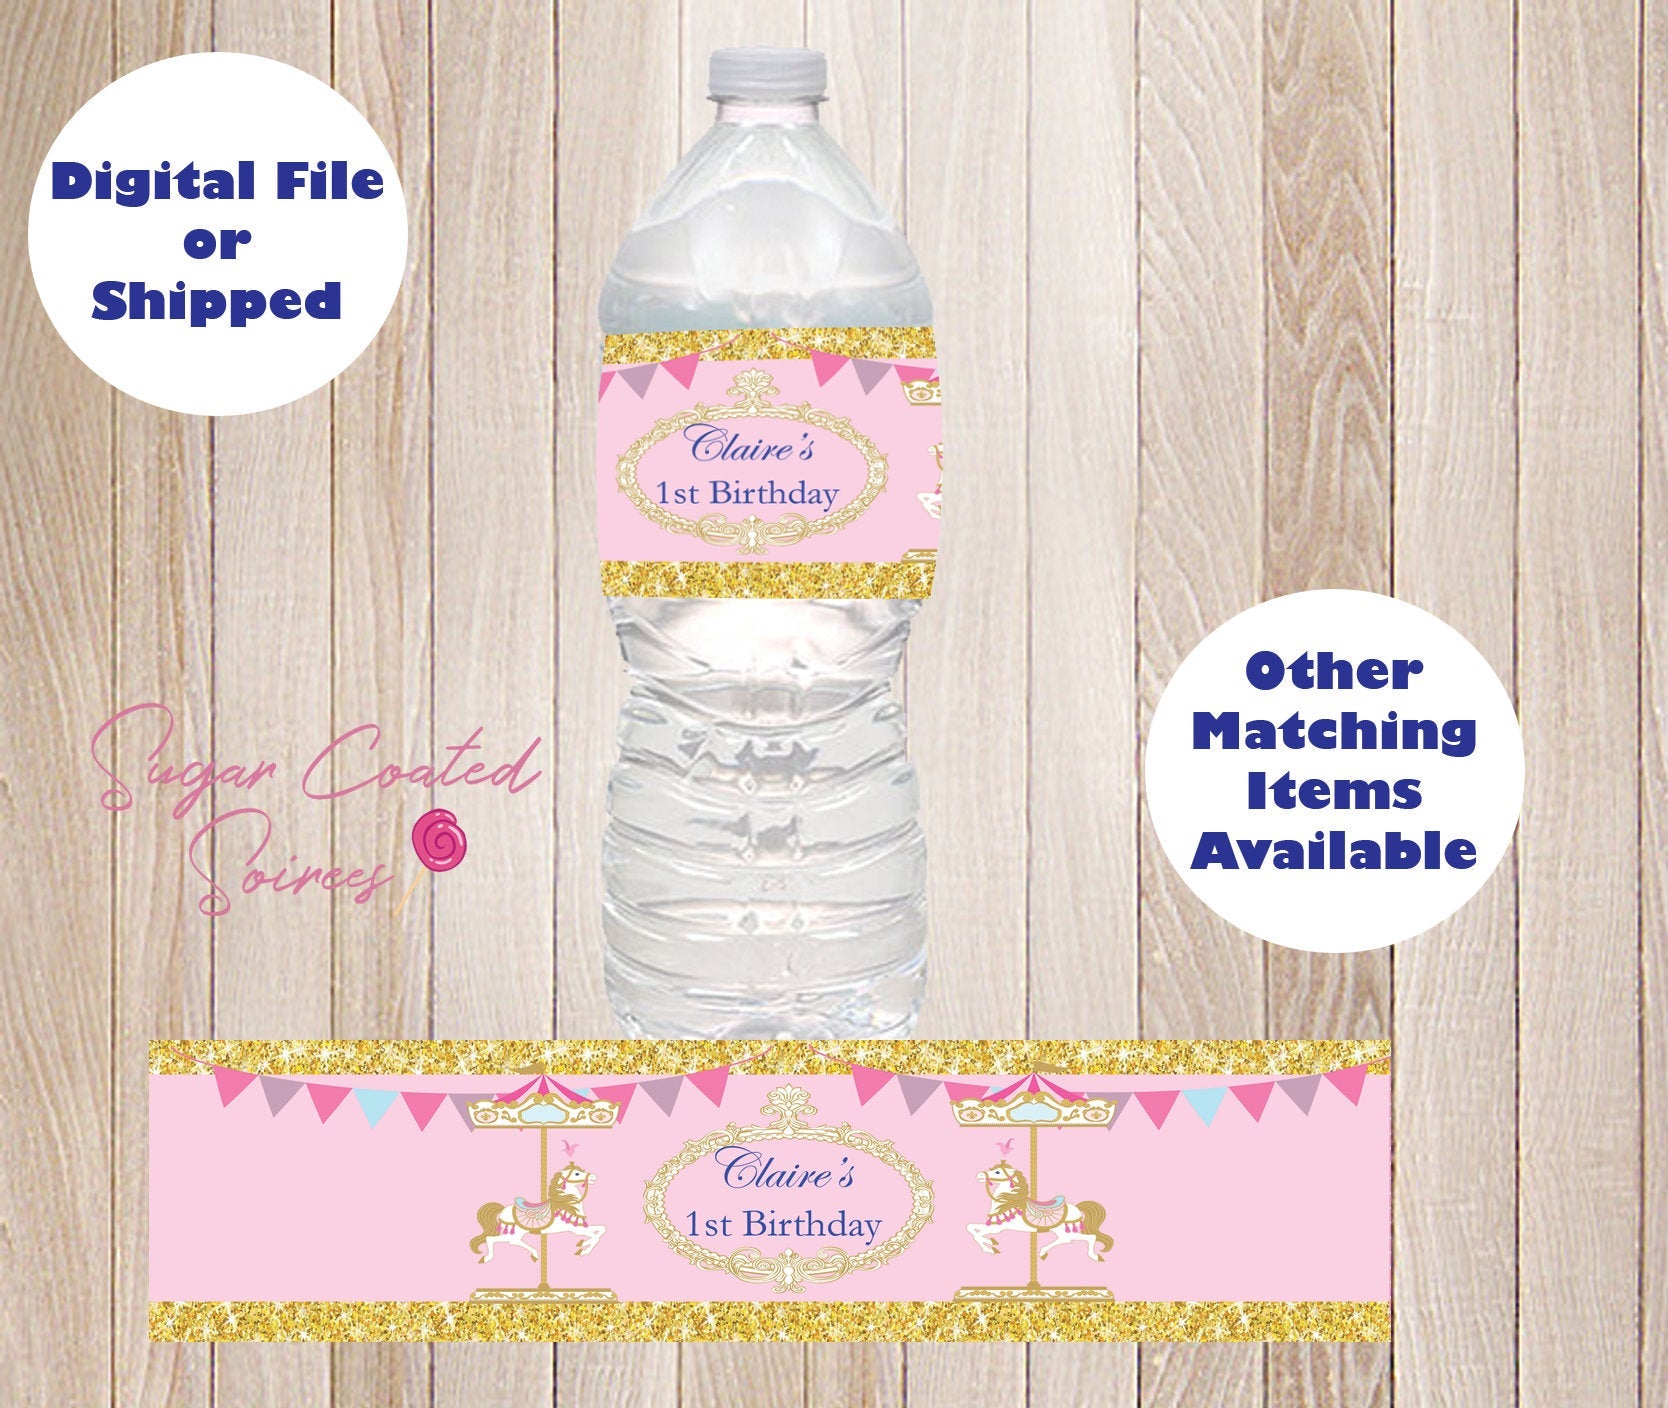 SHIPPED Pink Carousel Personalized Water Bottle Label, Birthday Party Favor DIY